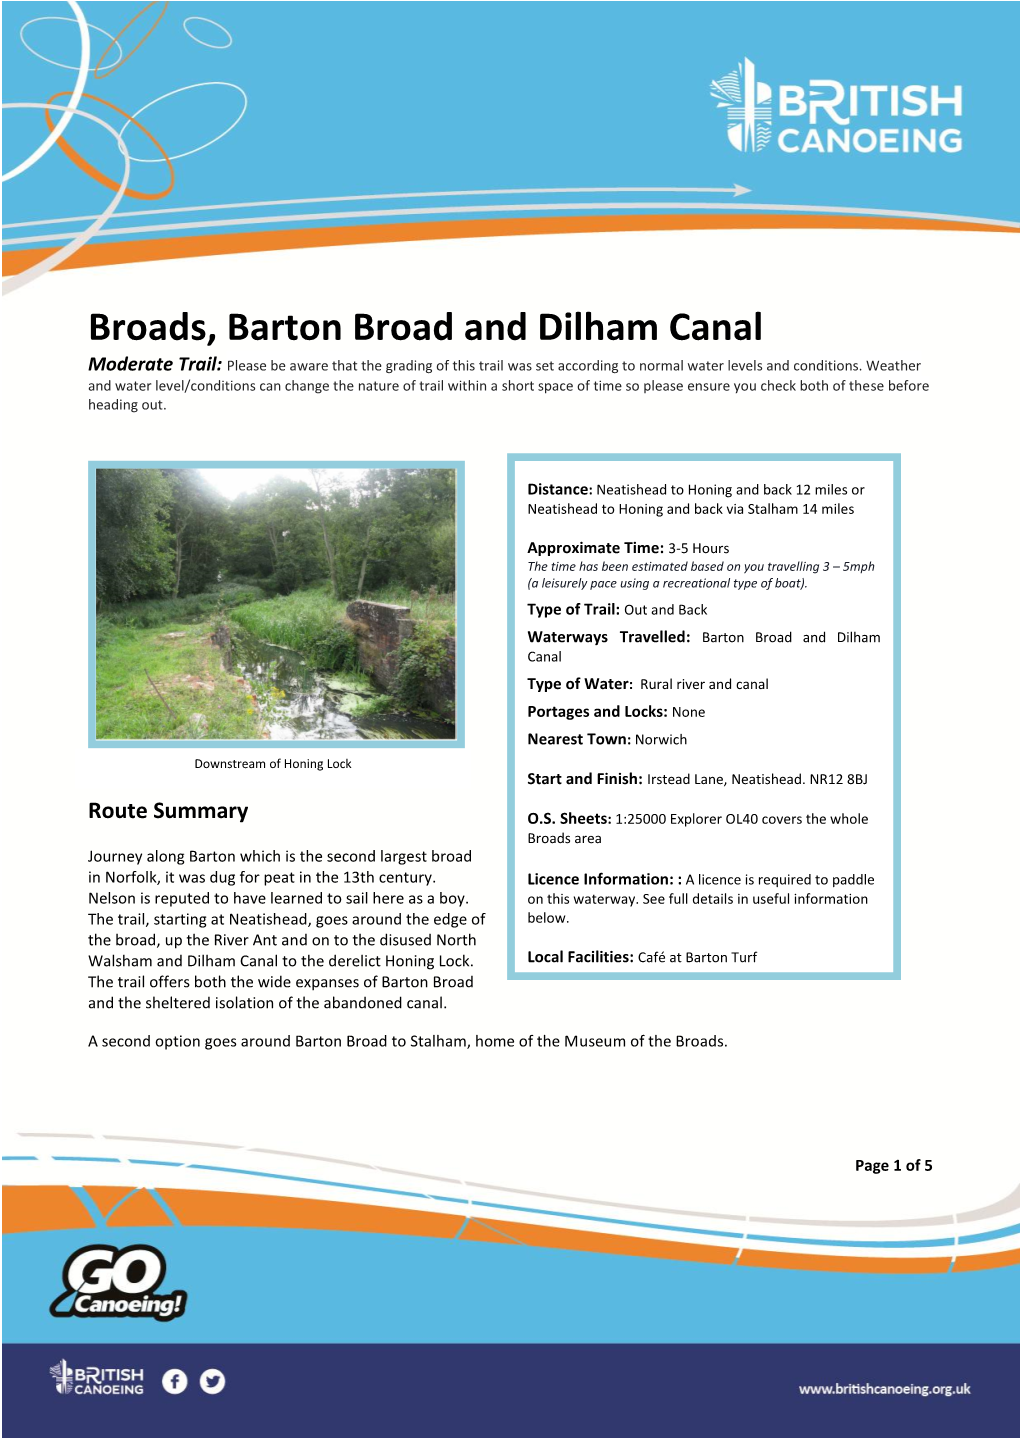 Broads, Barton Broad and Dilham Canal Moderate Trail: Please Be Aware That the Grading of This Trail Was Set According to Normal Water Levels and Conditions